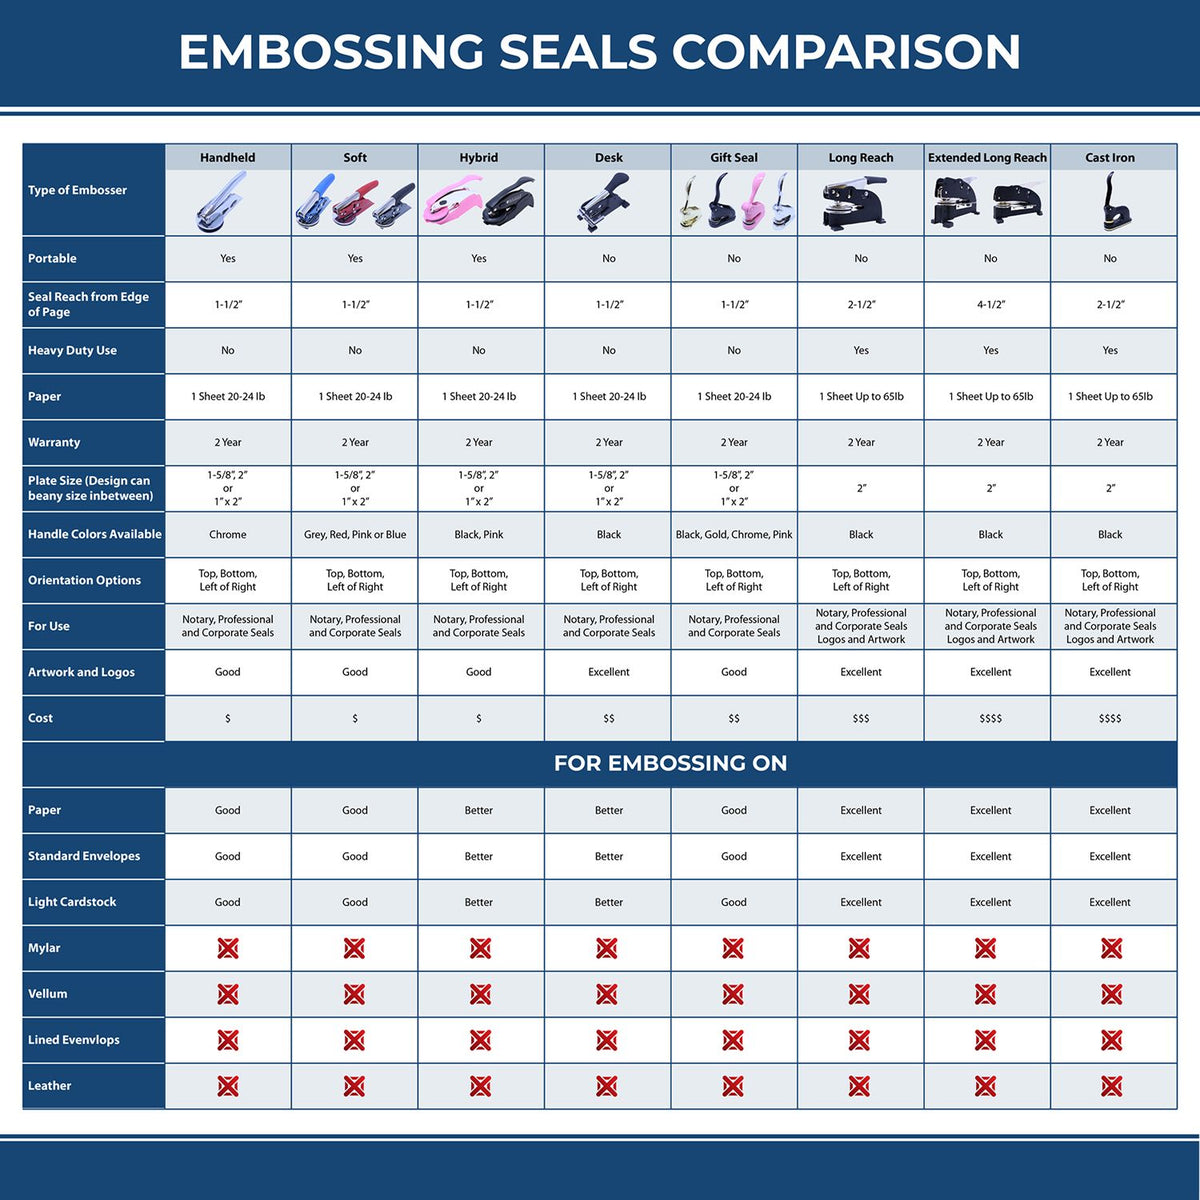 A comparison chart for the different types of mount models available for the Hybrid Iowa Architect Seal